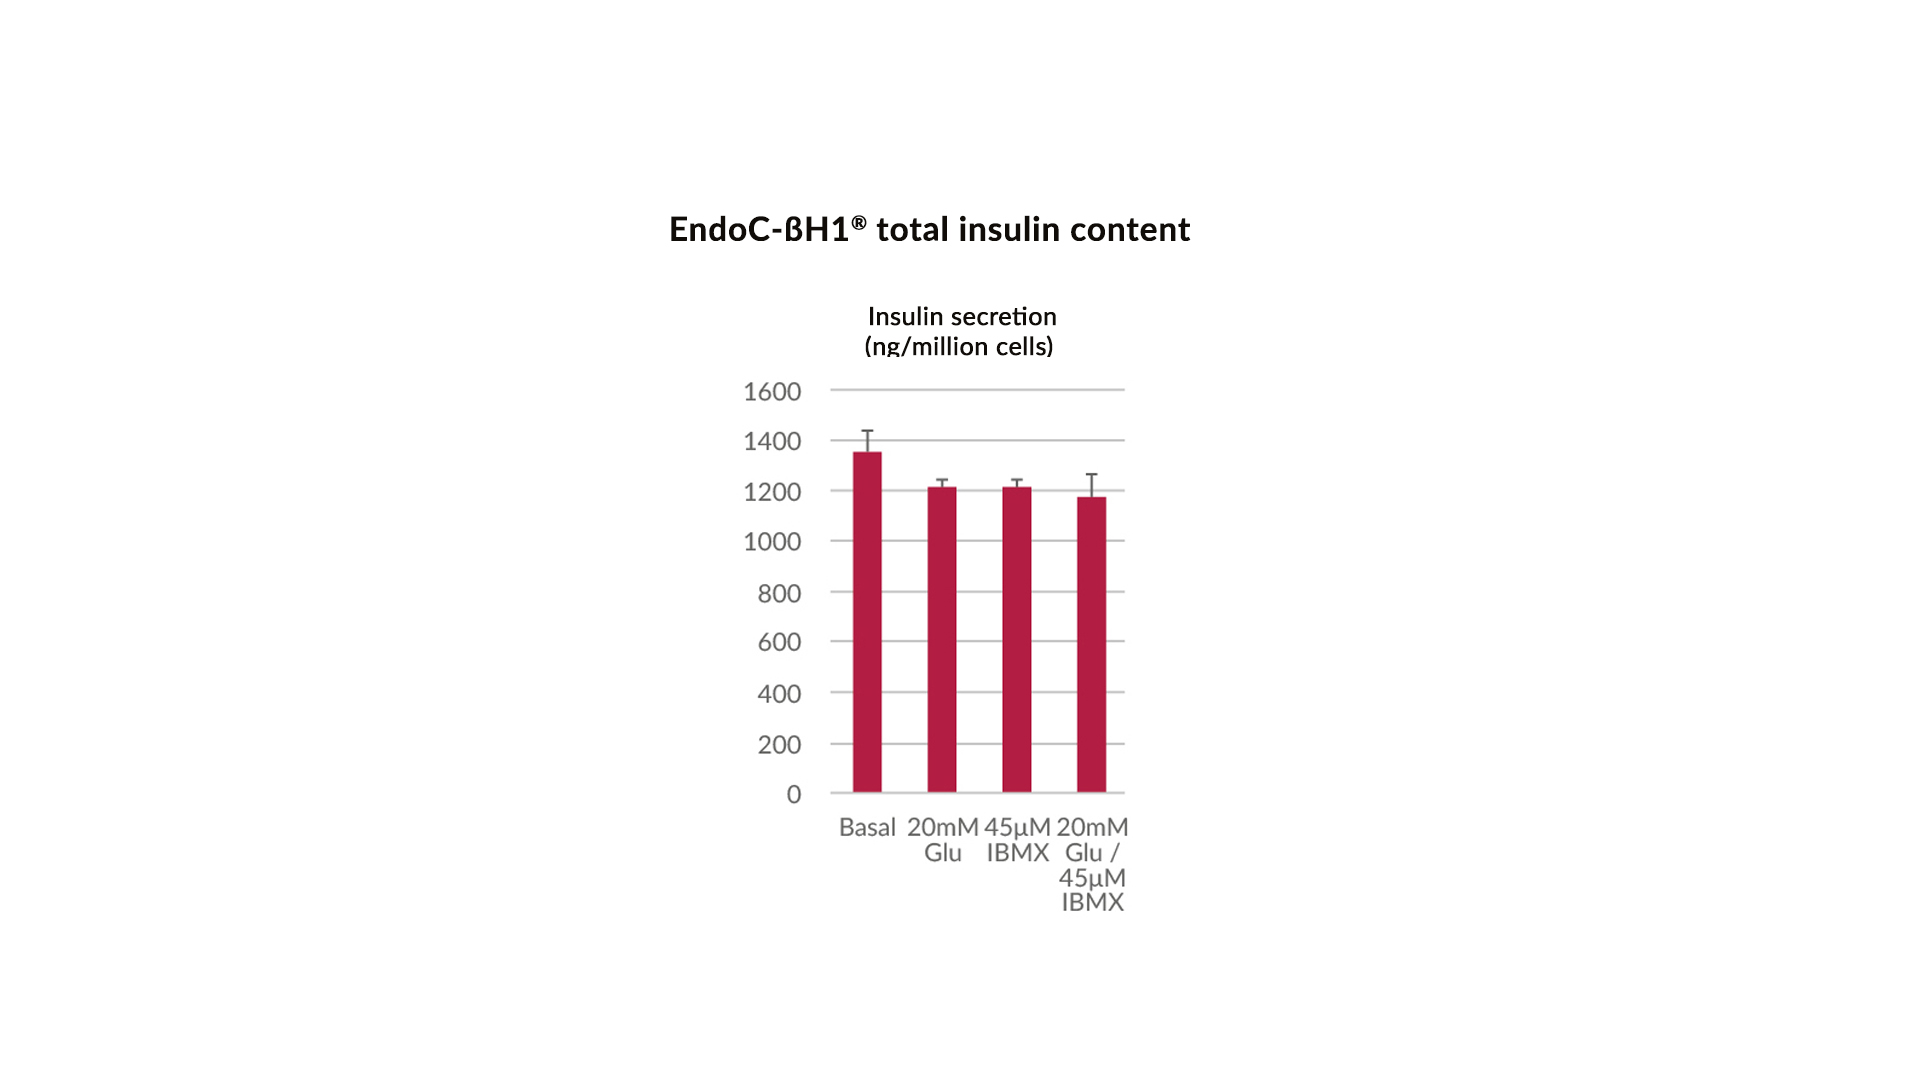 insulin-content-endoc-bh1-human-cell-design-2021-1